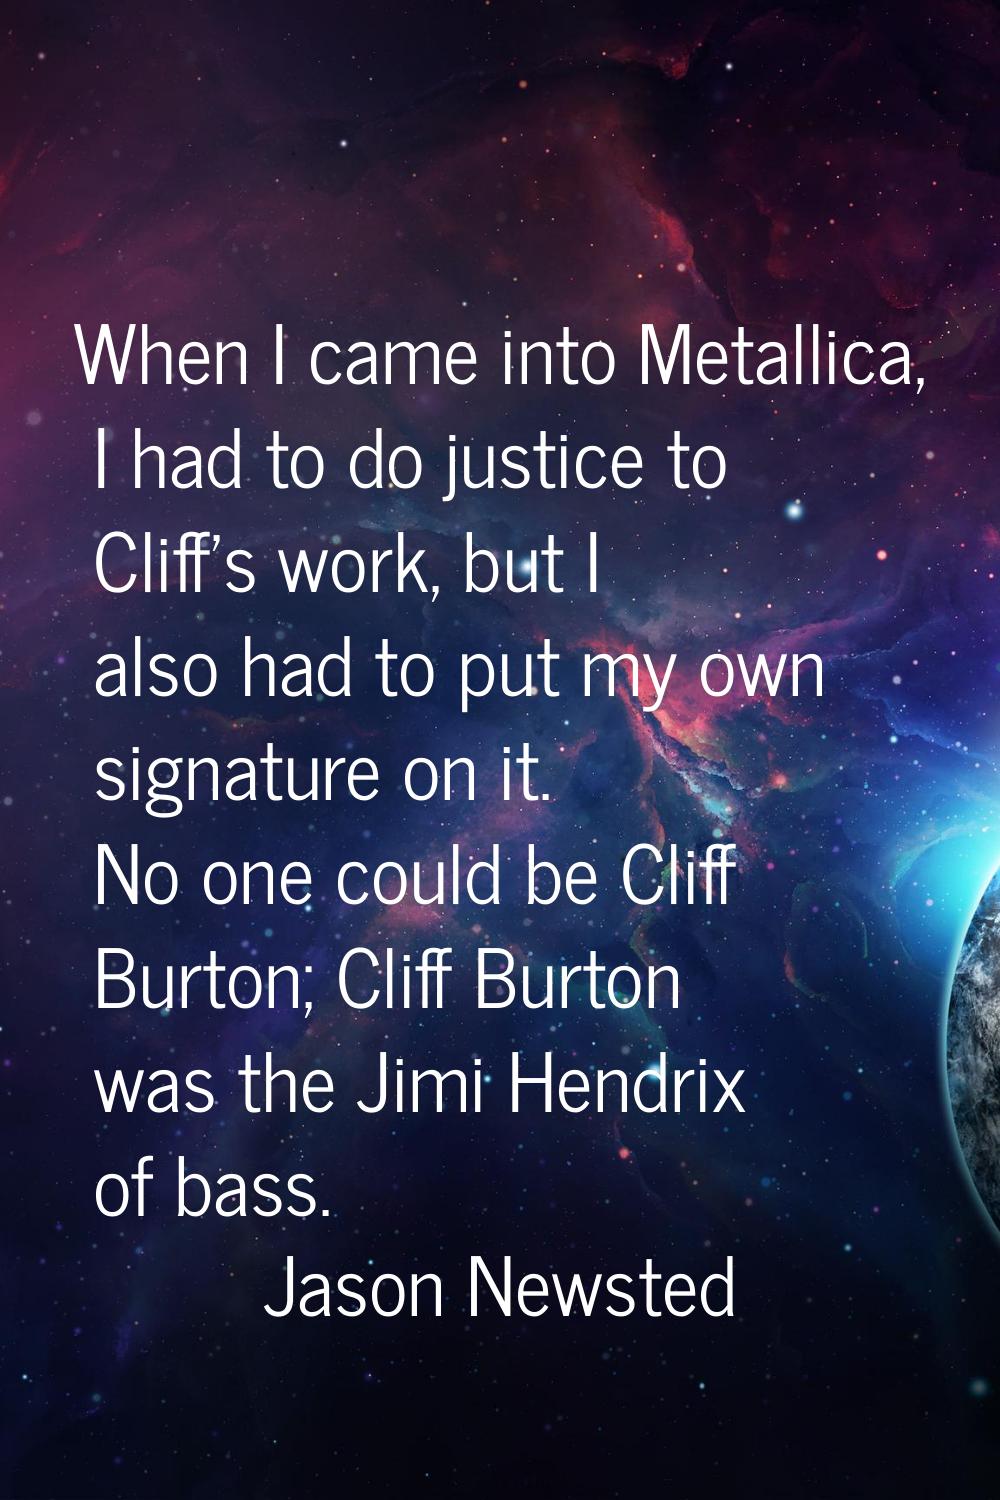 When I came into Metallica, I had to do justice to Cliff's work, but I also had to put my own signa